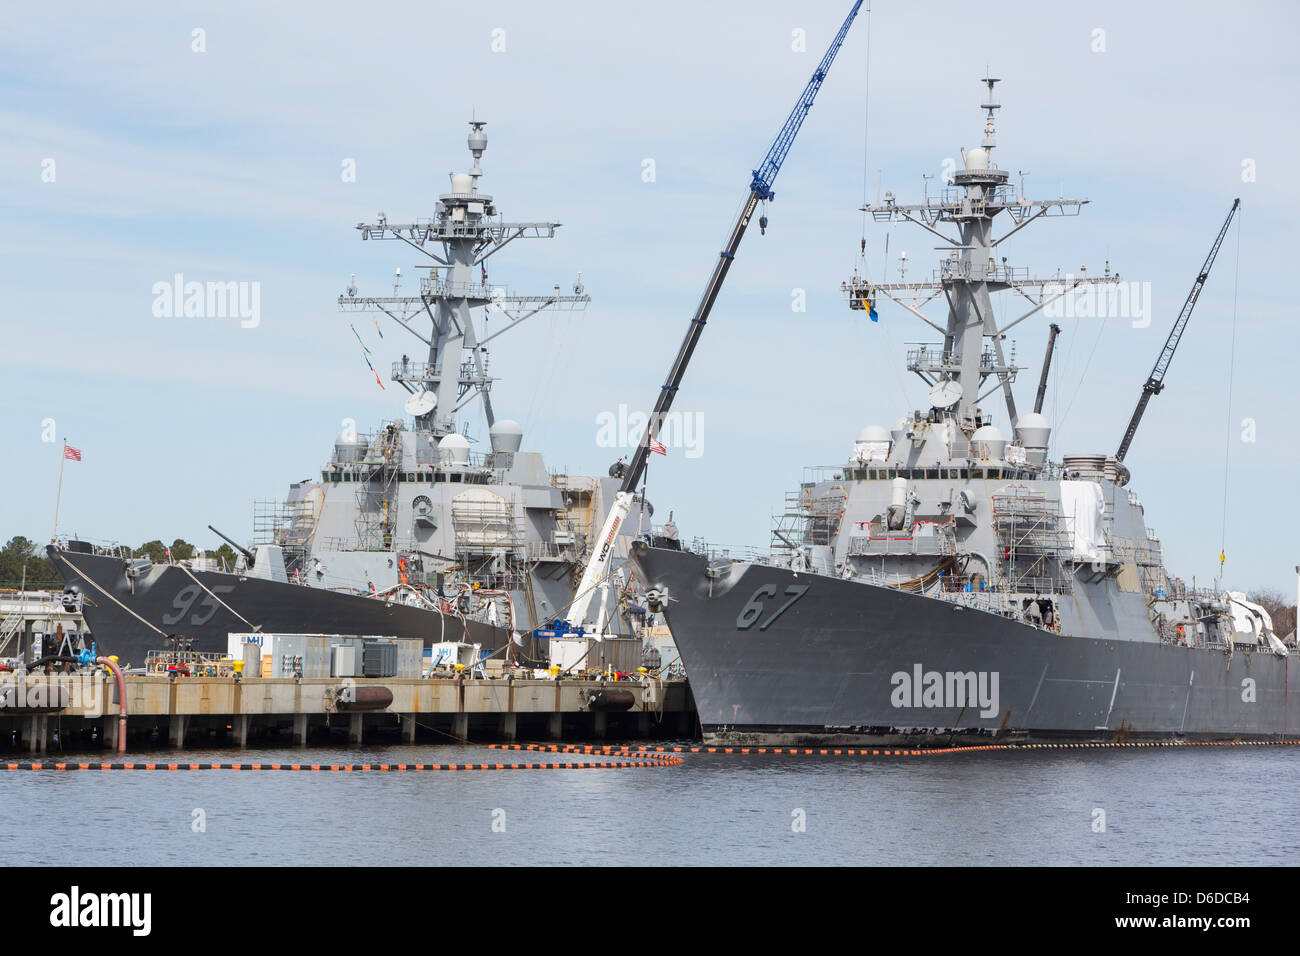 The Arleigh Burke Class destroyer USS Cole (DDG-67) in port at Naval Station Norfolk. Stock Photo